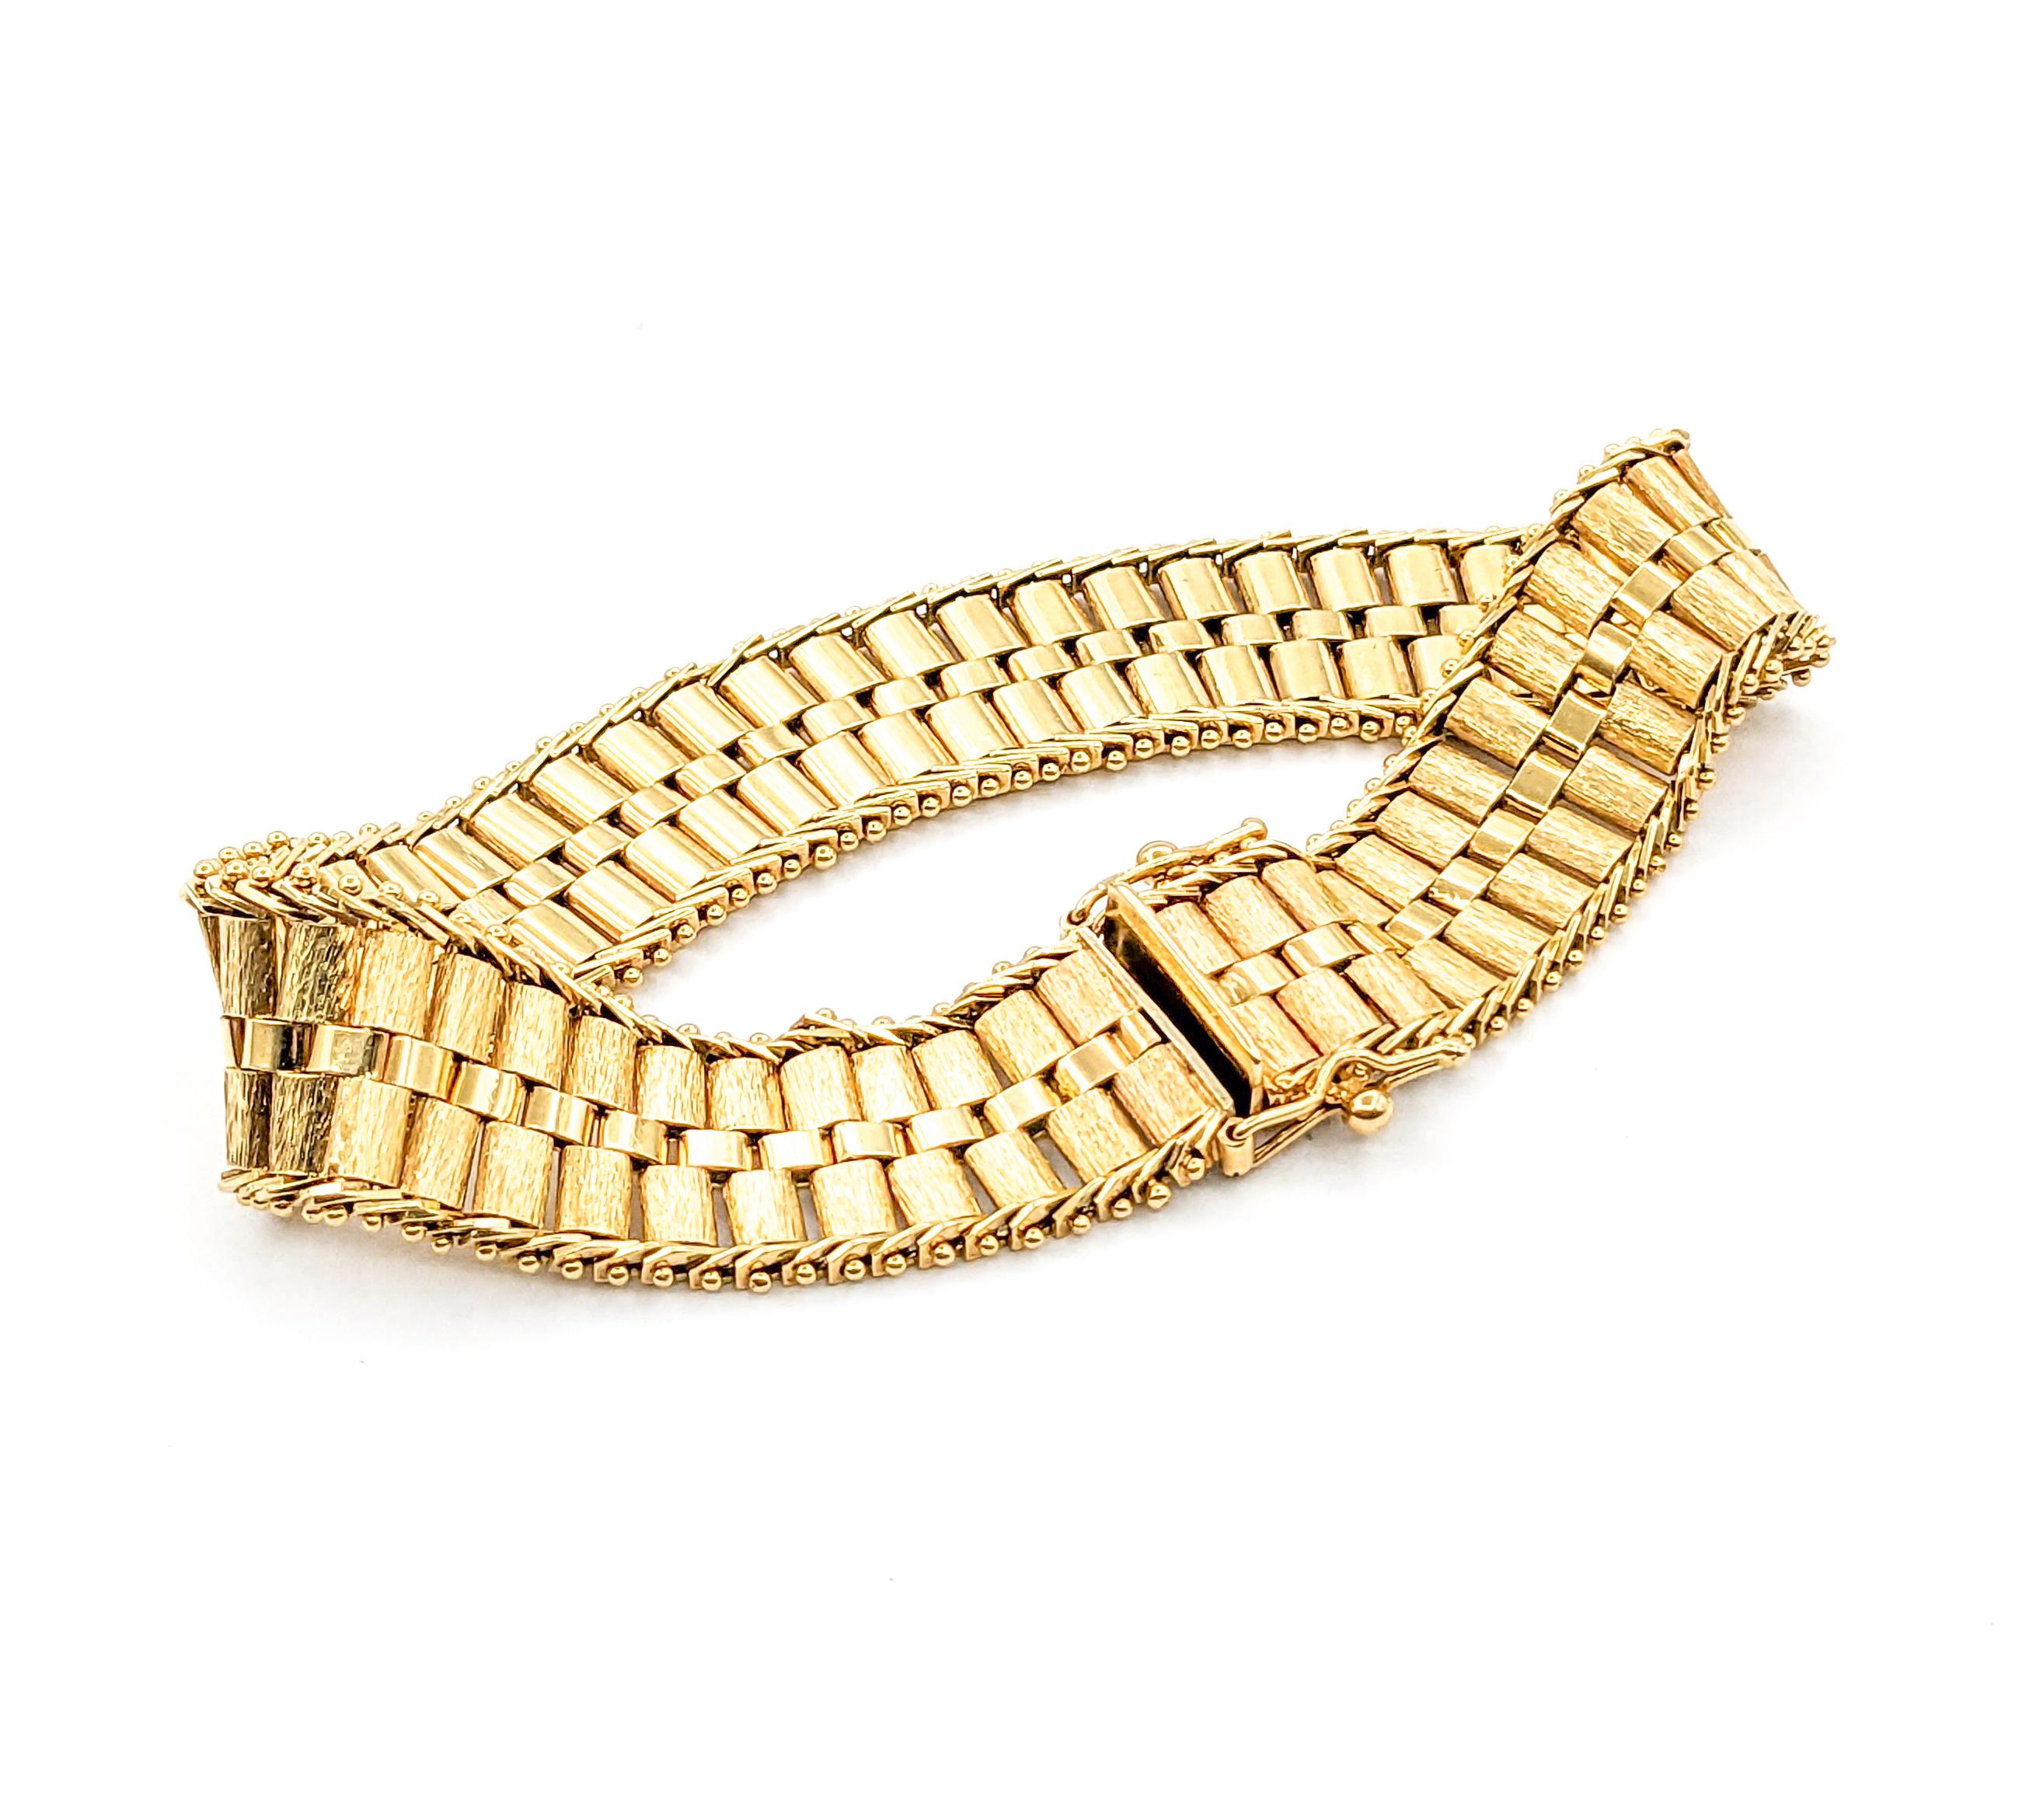 Rolex Link Design Bracelet In Yellow Gold In Excellent Condition For Sale In Bloomington, MN